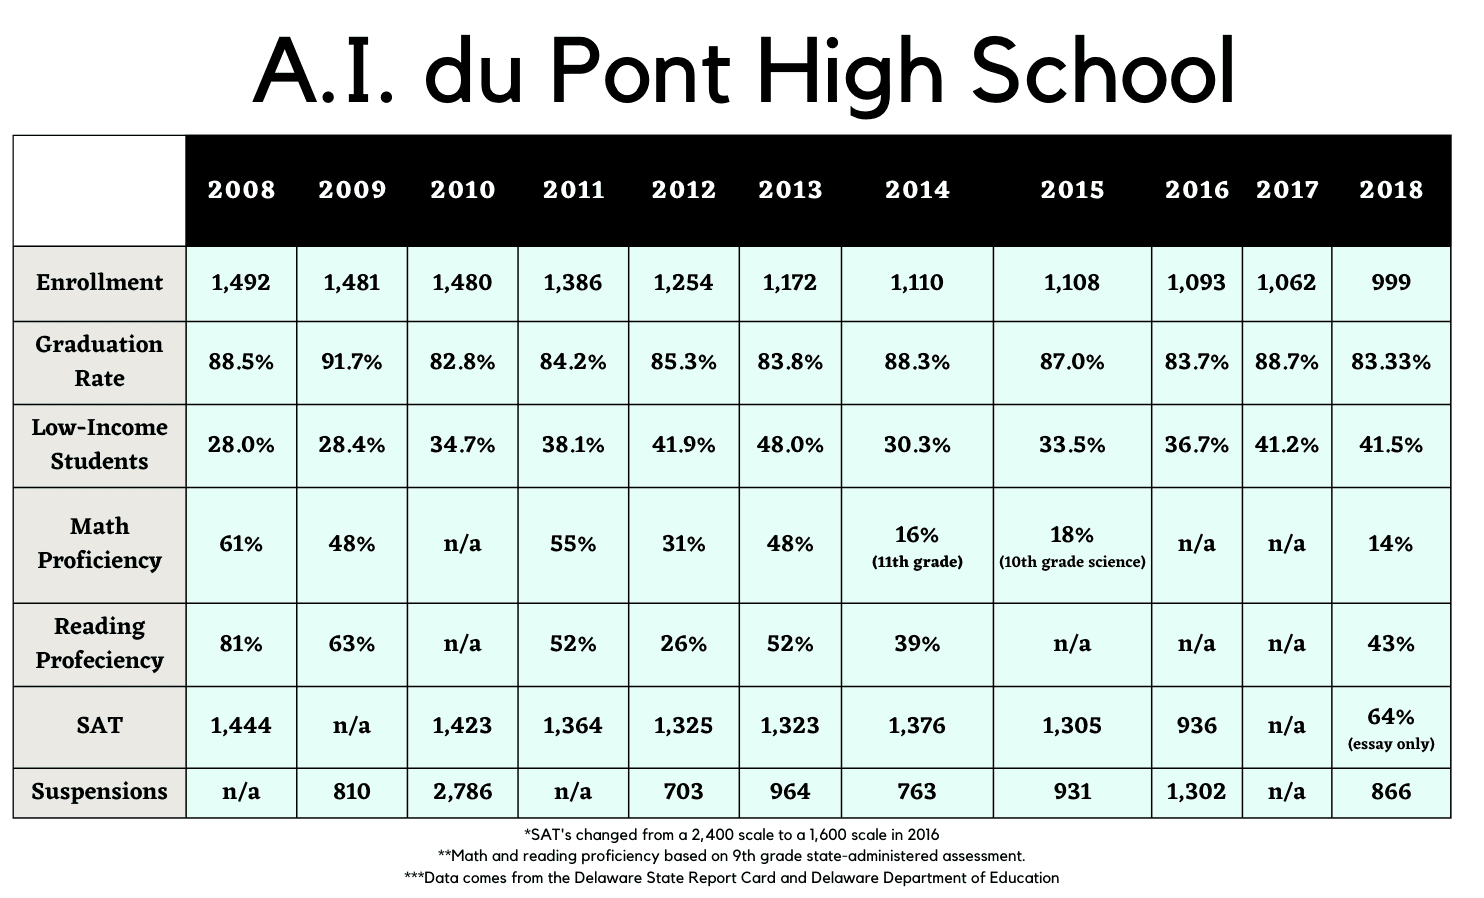 Data on A.I. du Pont High from 2008-2018.